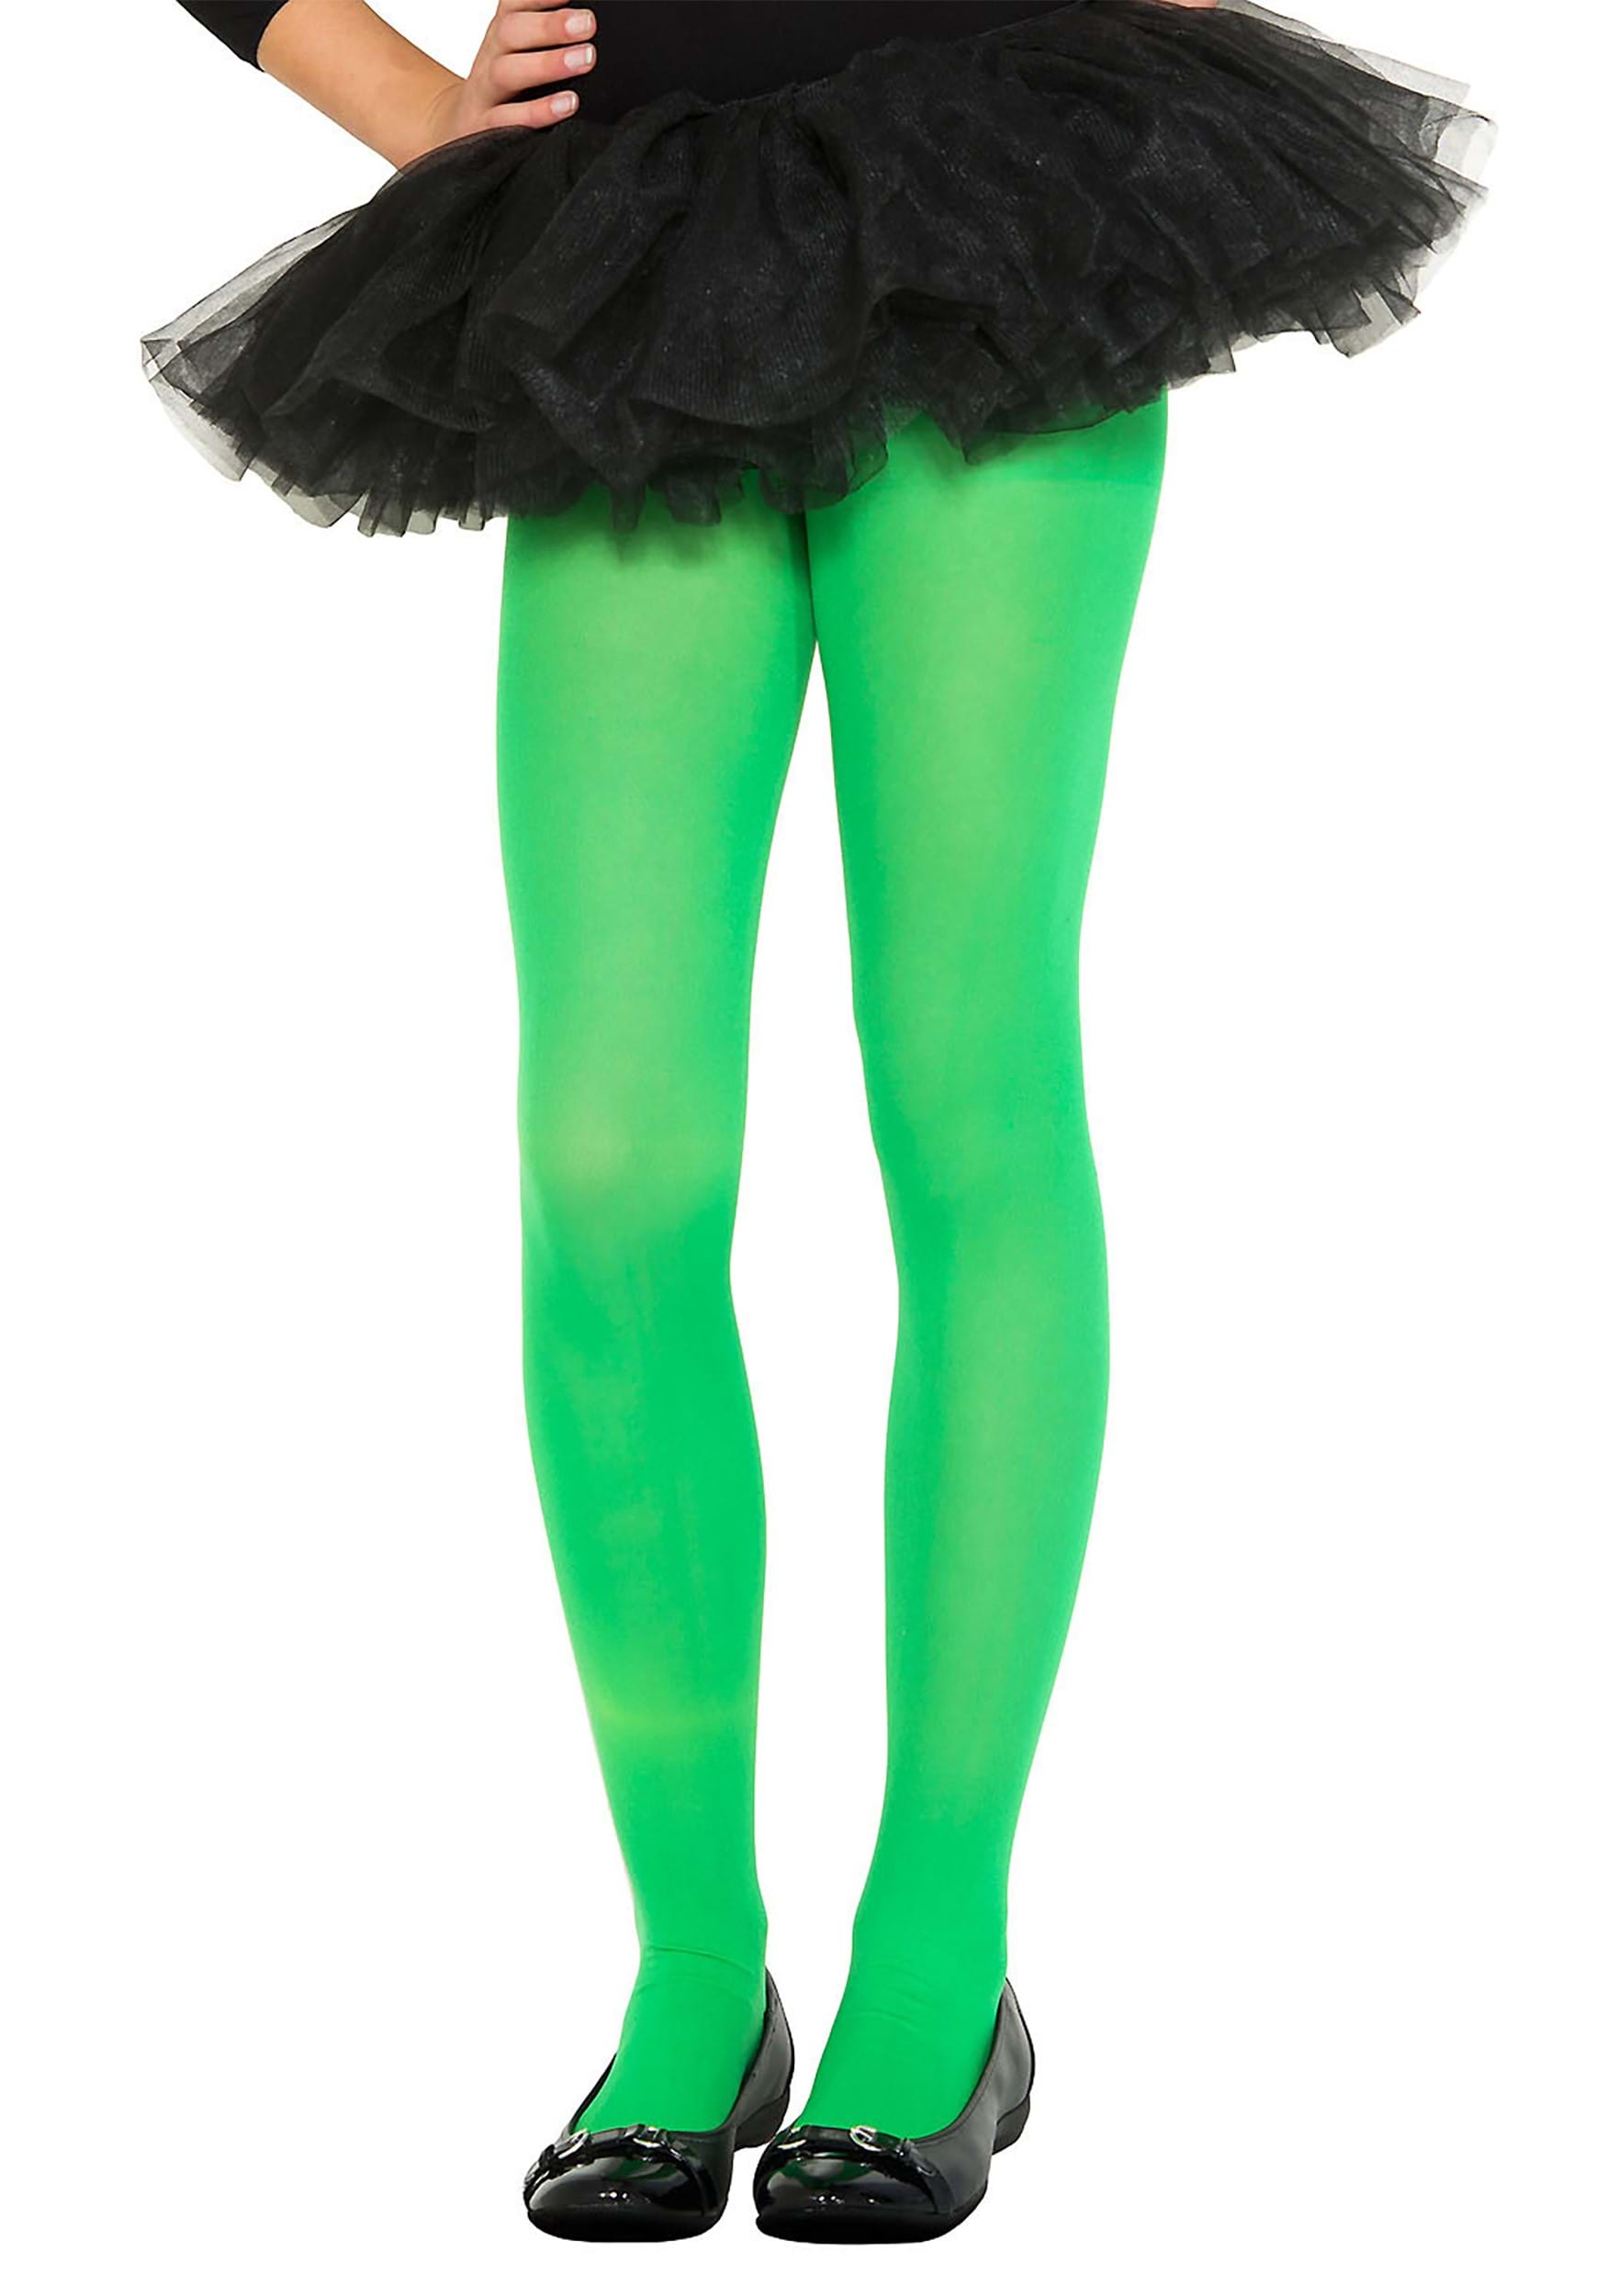 https://images.halloweencostumes.ca/products/82625/1-1/girls-green-opaque-tights.jpg